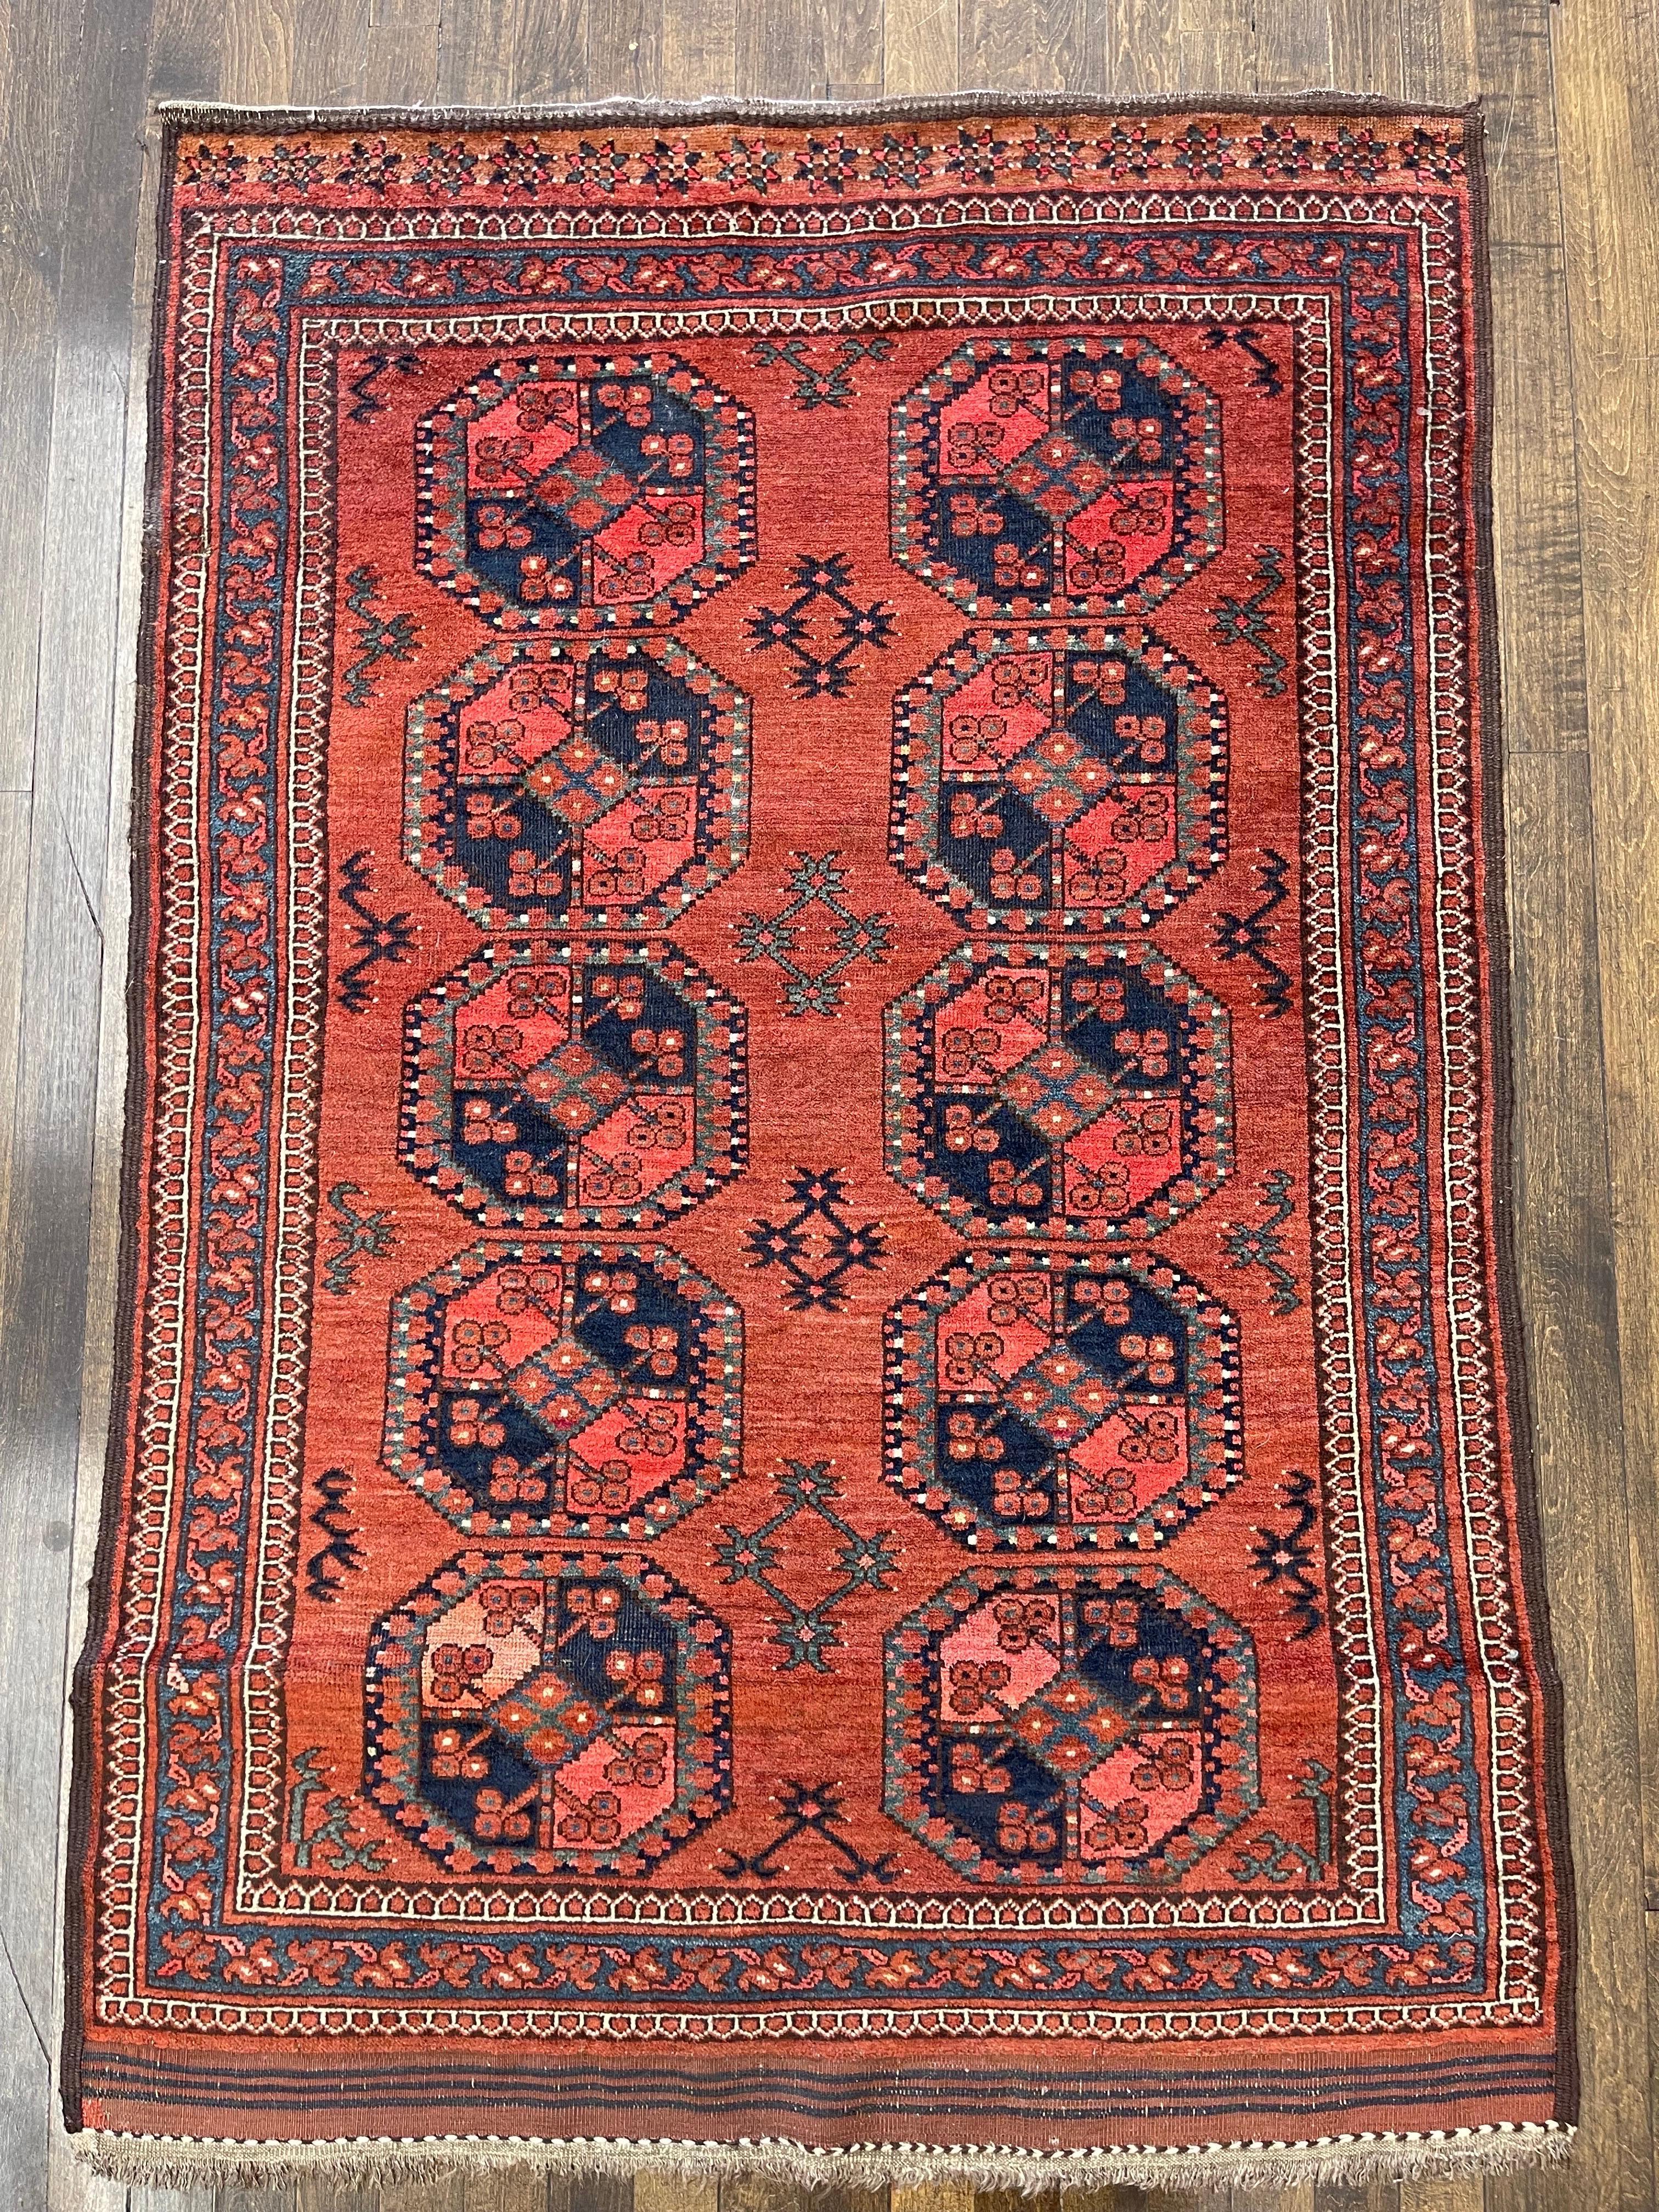 A cute gorgeous hand knotted antique Ersari rug,this piece remained us of an exceptional example of the upholding of the original characteristics and represents the best of Turkman woven art.The great richness of coloring,the originality of the